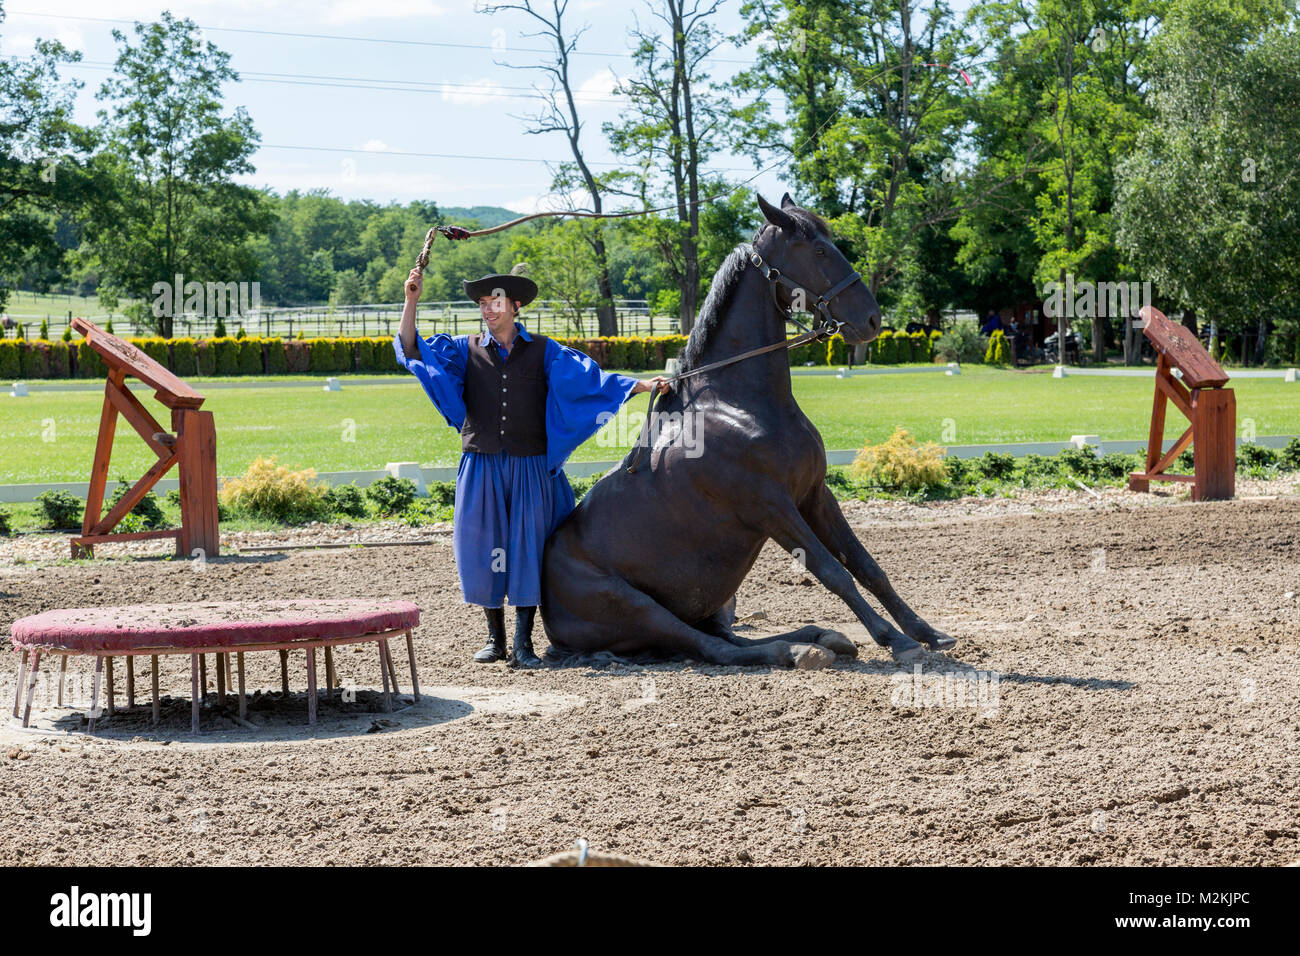 Hungarian horseman leans against his horse sitting in a funny trick at horse show in Budapest Hungary countryside. Stock Photo